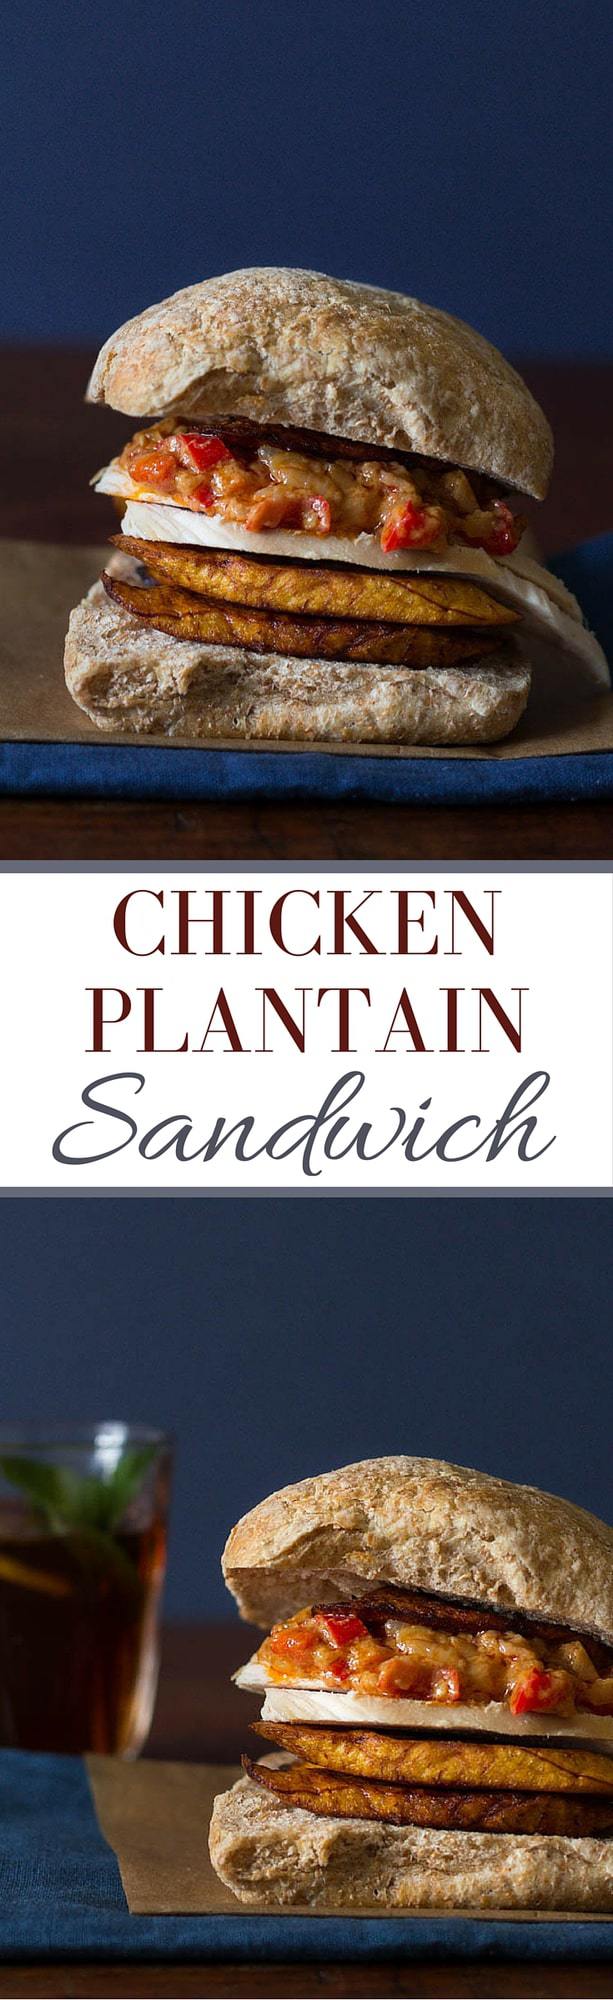 Chicken Plantain Sandwich | Recipes From A Pantry